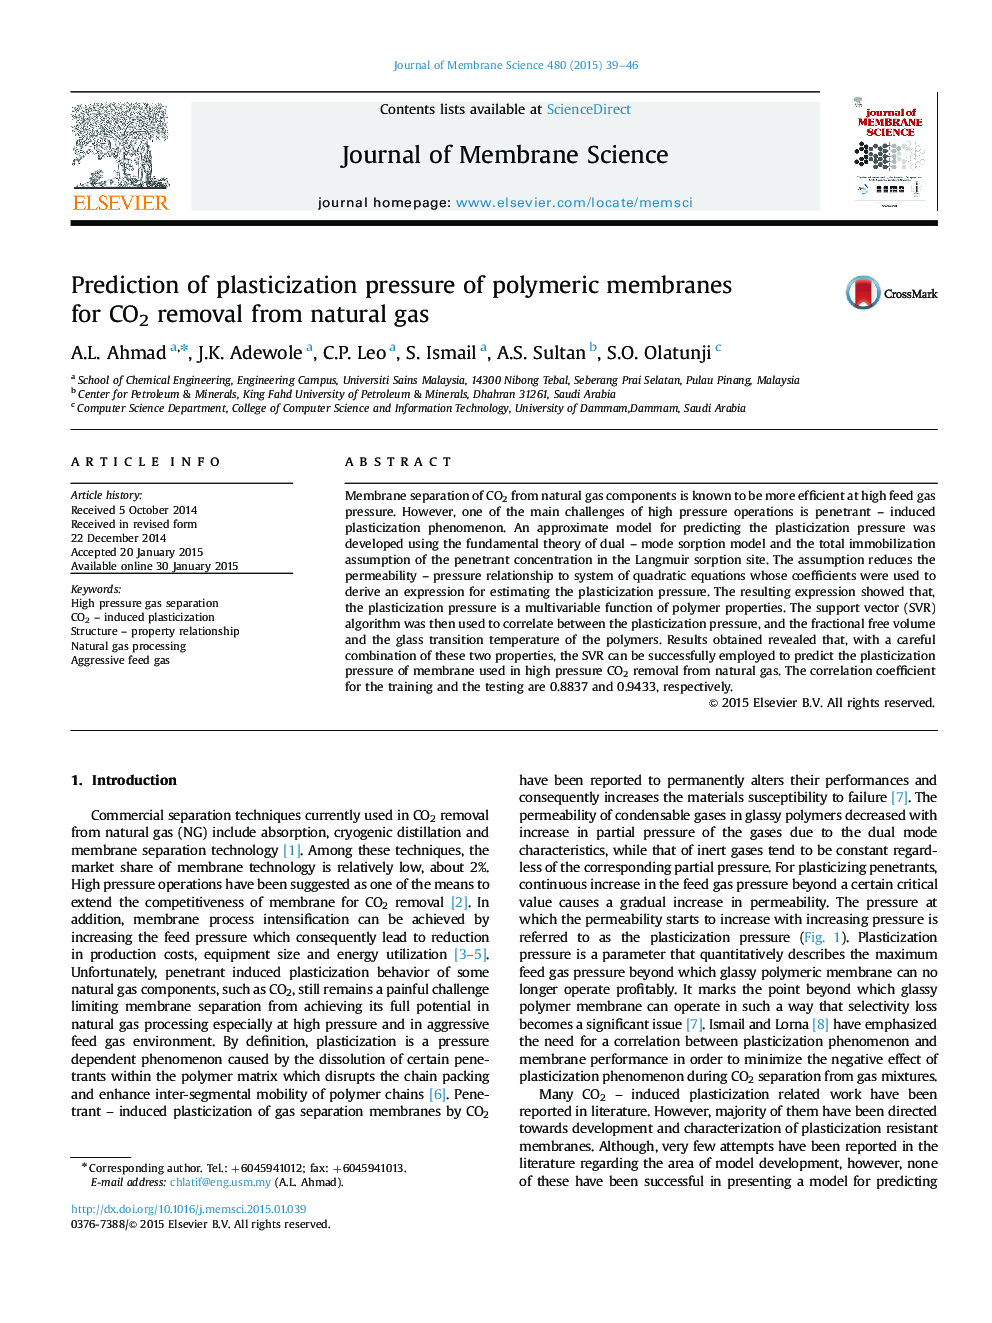 Prediction of plasticization pressure of polymeric membranes for CO2 removal from natural gas